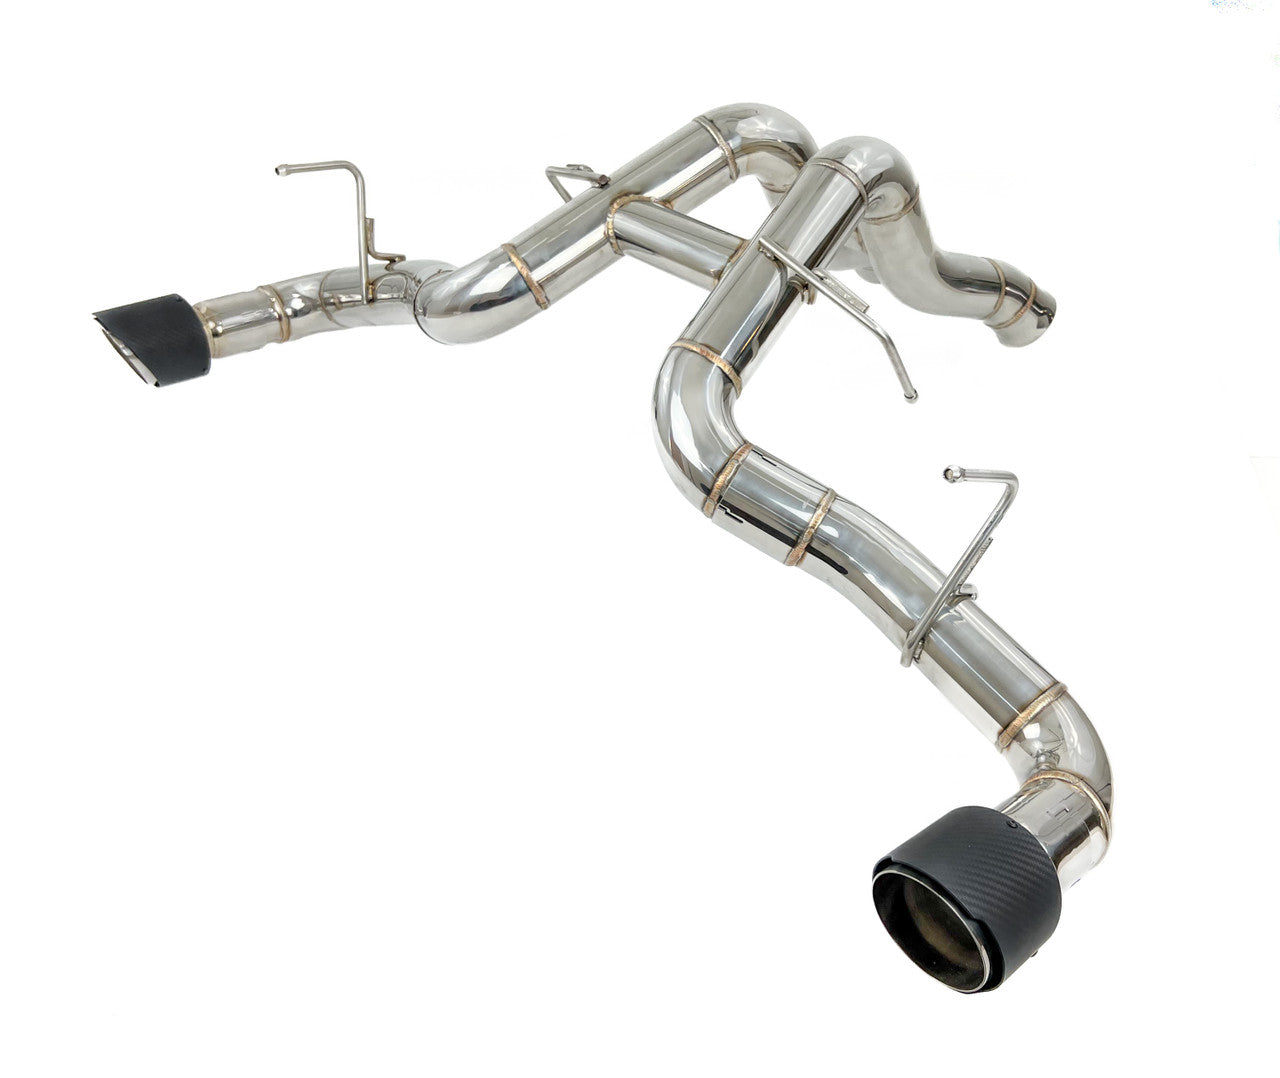 Top Speed Pro 1 - Race Spec H Pipe Exhaust System (570)